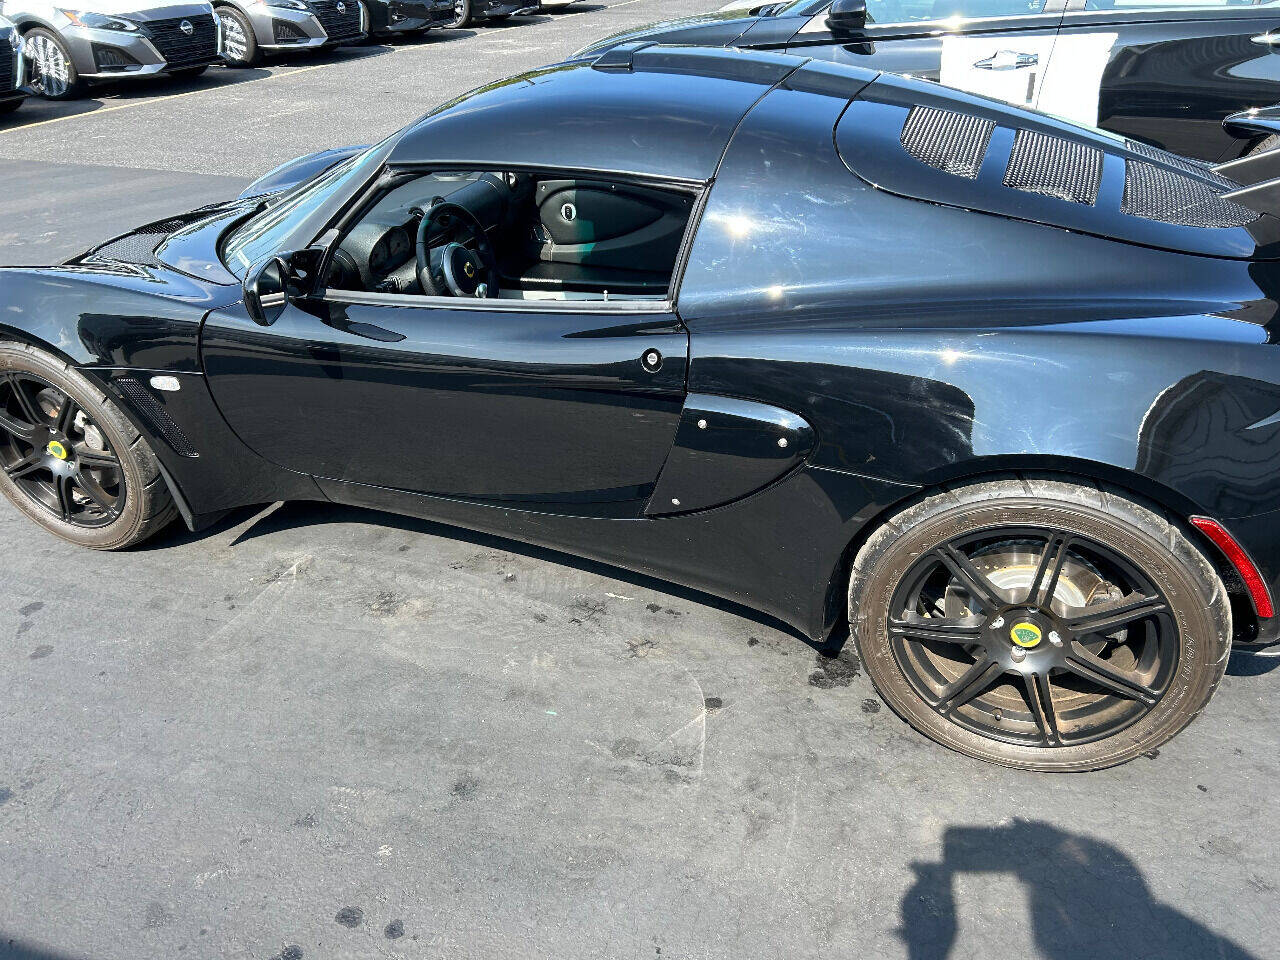 Used 2007 Lotus Exige For Sale | Lotus of West New York